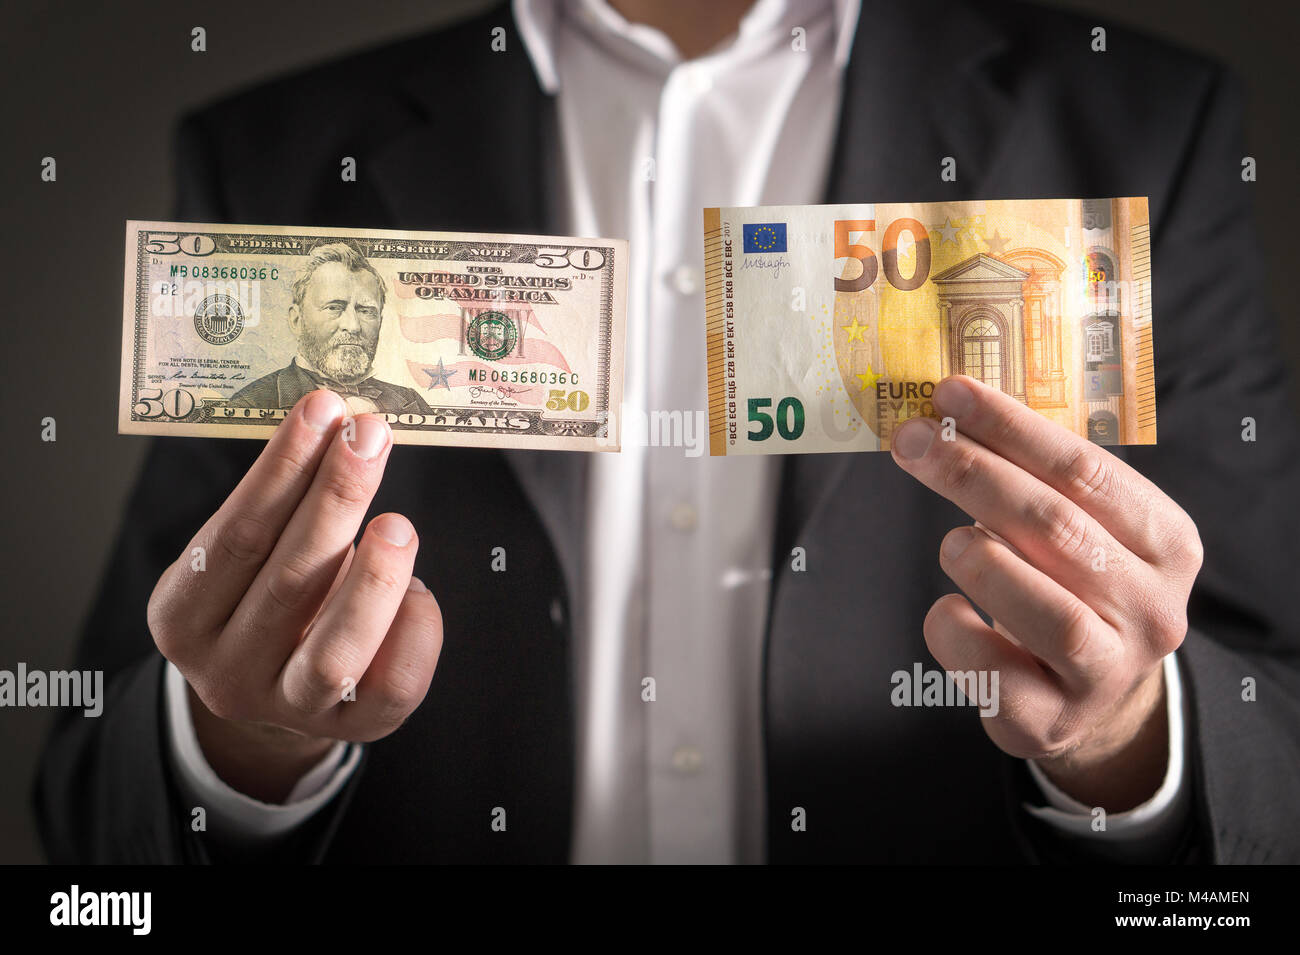 Dollar vs euro. Business man in suit holding 50 banknote and bill in both currency in hand. Exchange rate, world economy and financial concept. Stock Photo